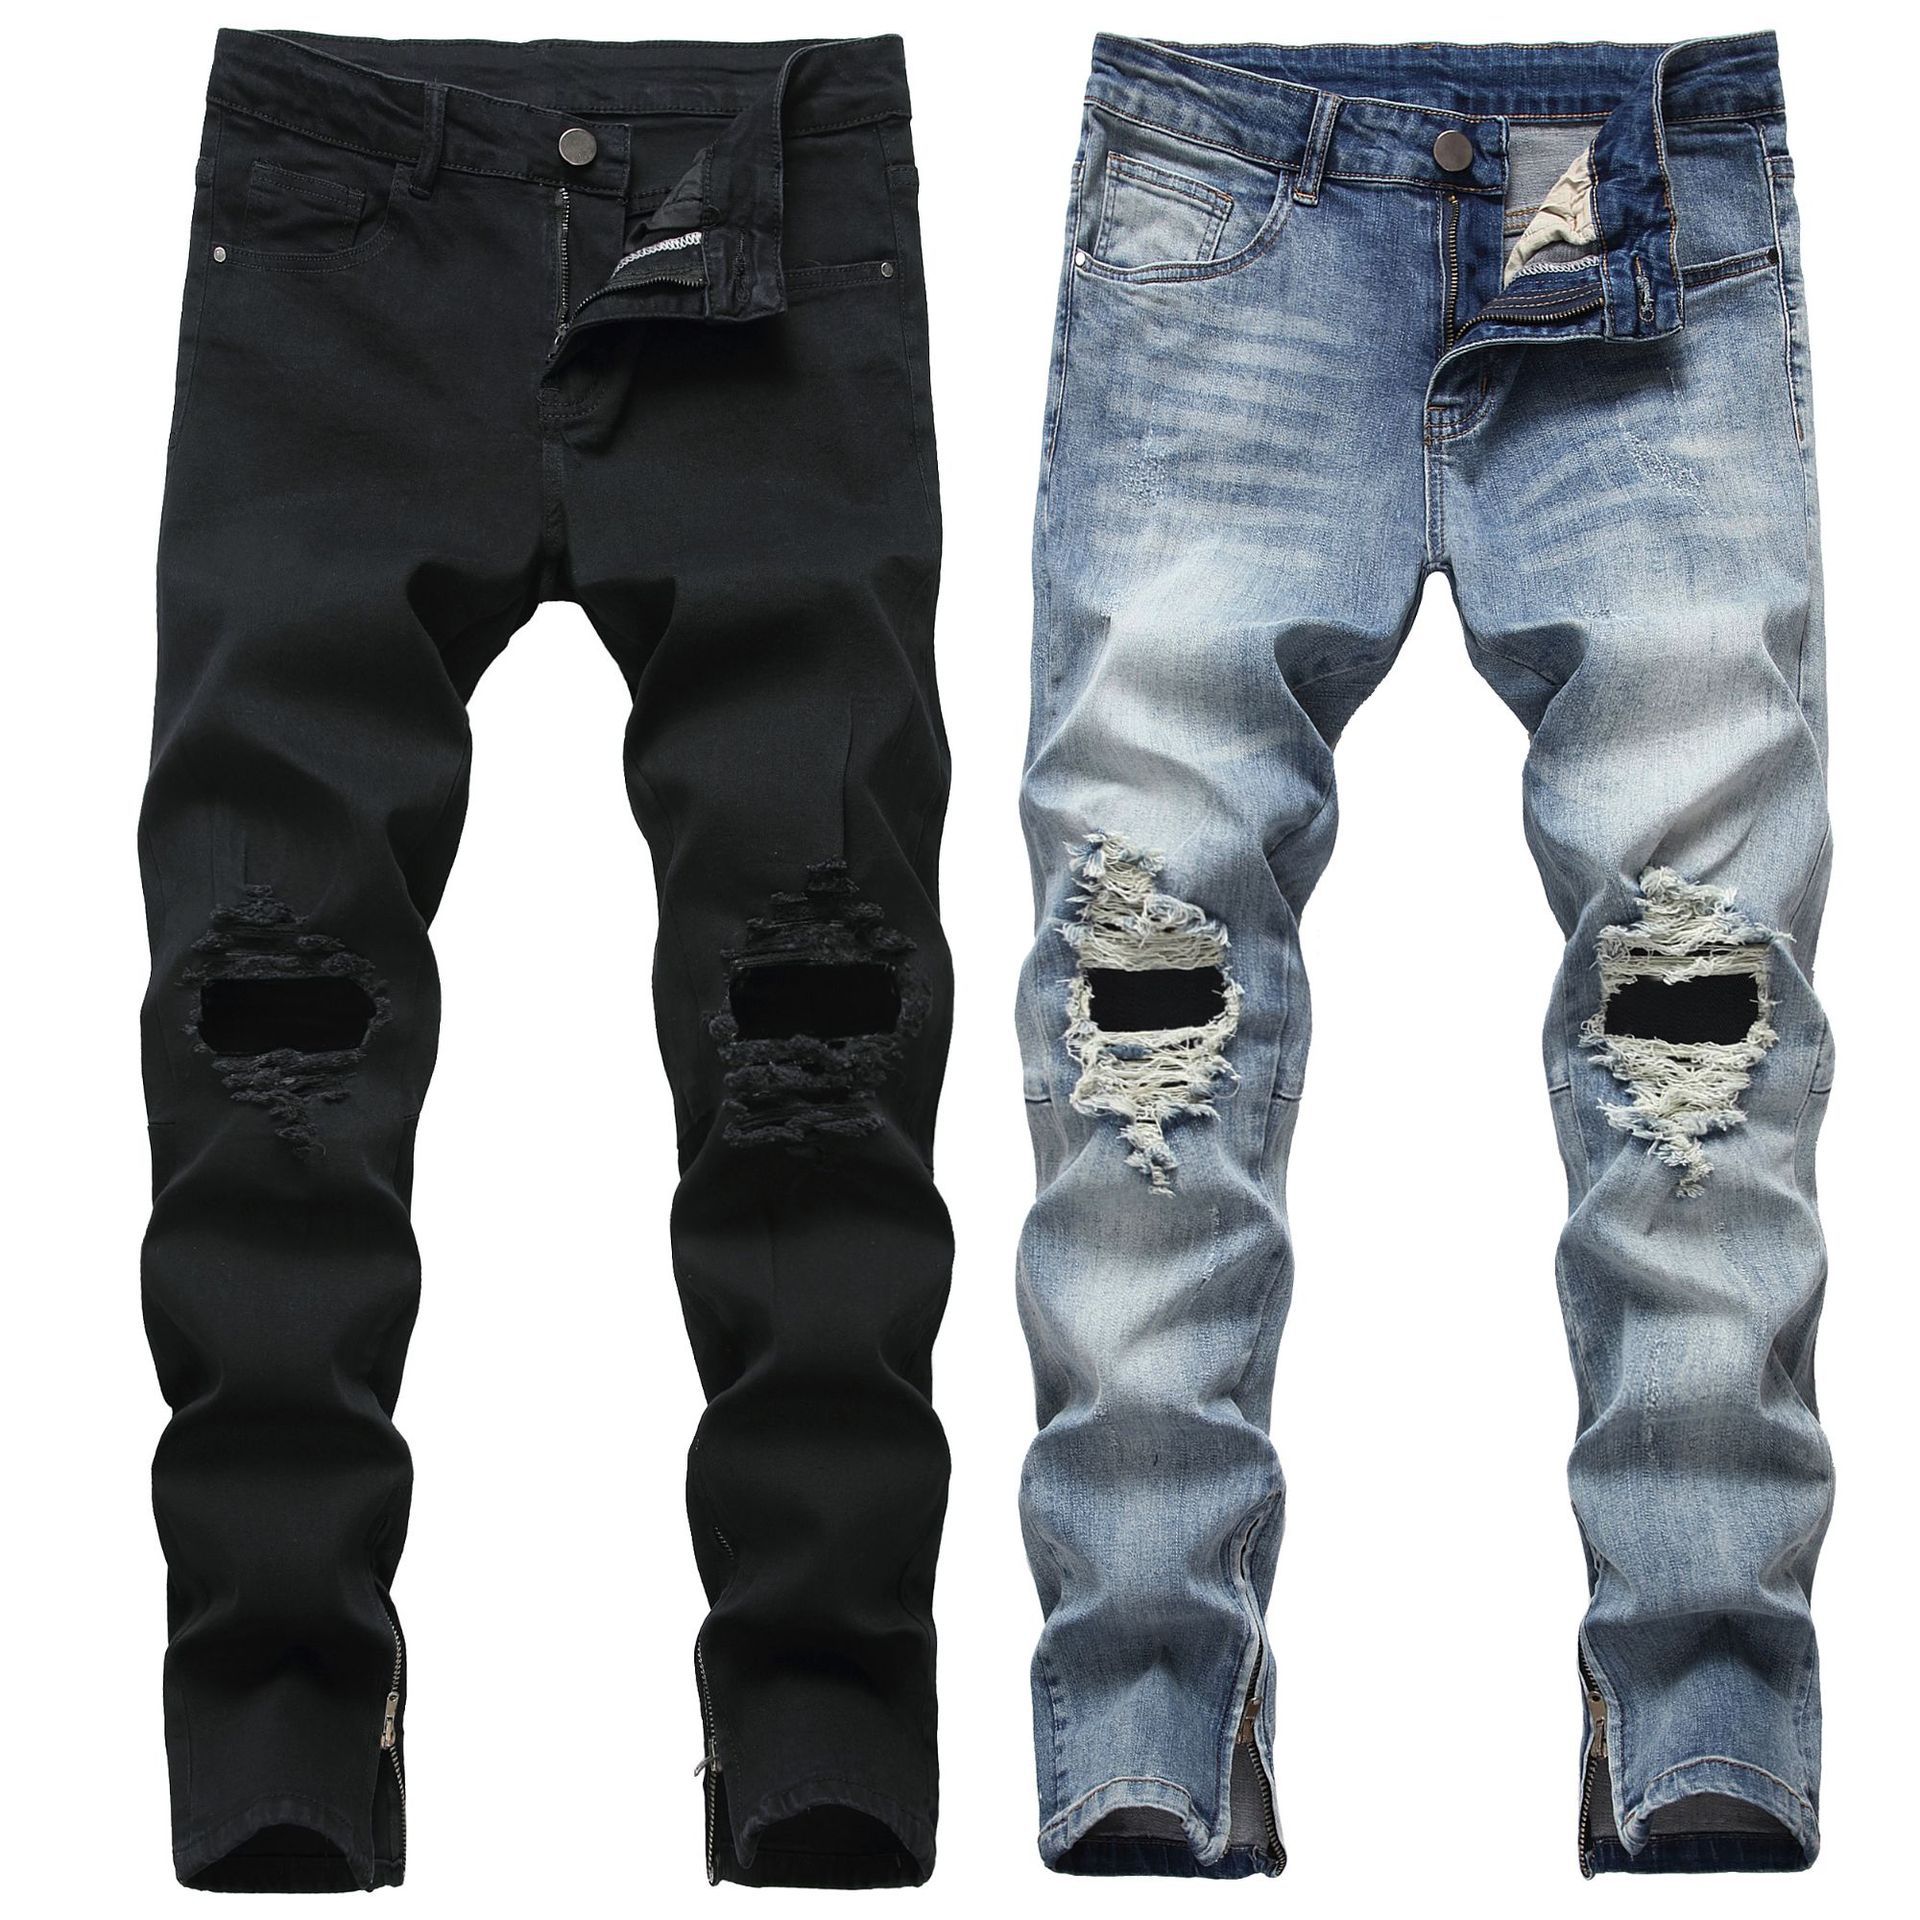   Foreign Trade Men's Pants Autumn New European and American Men's Jeans Ripped Zipper Split Fashion All-Match Trendy Men's Essential